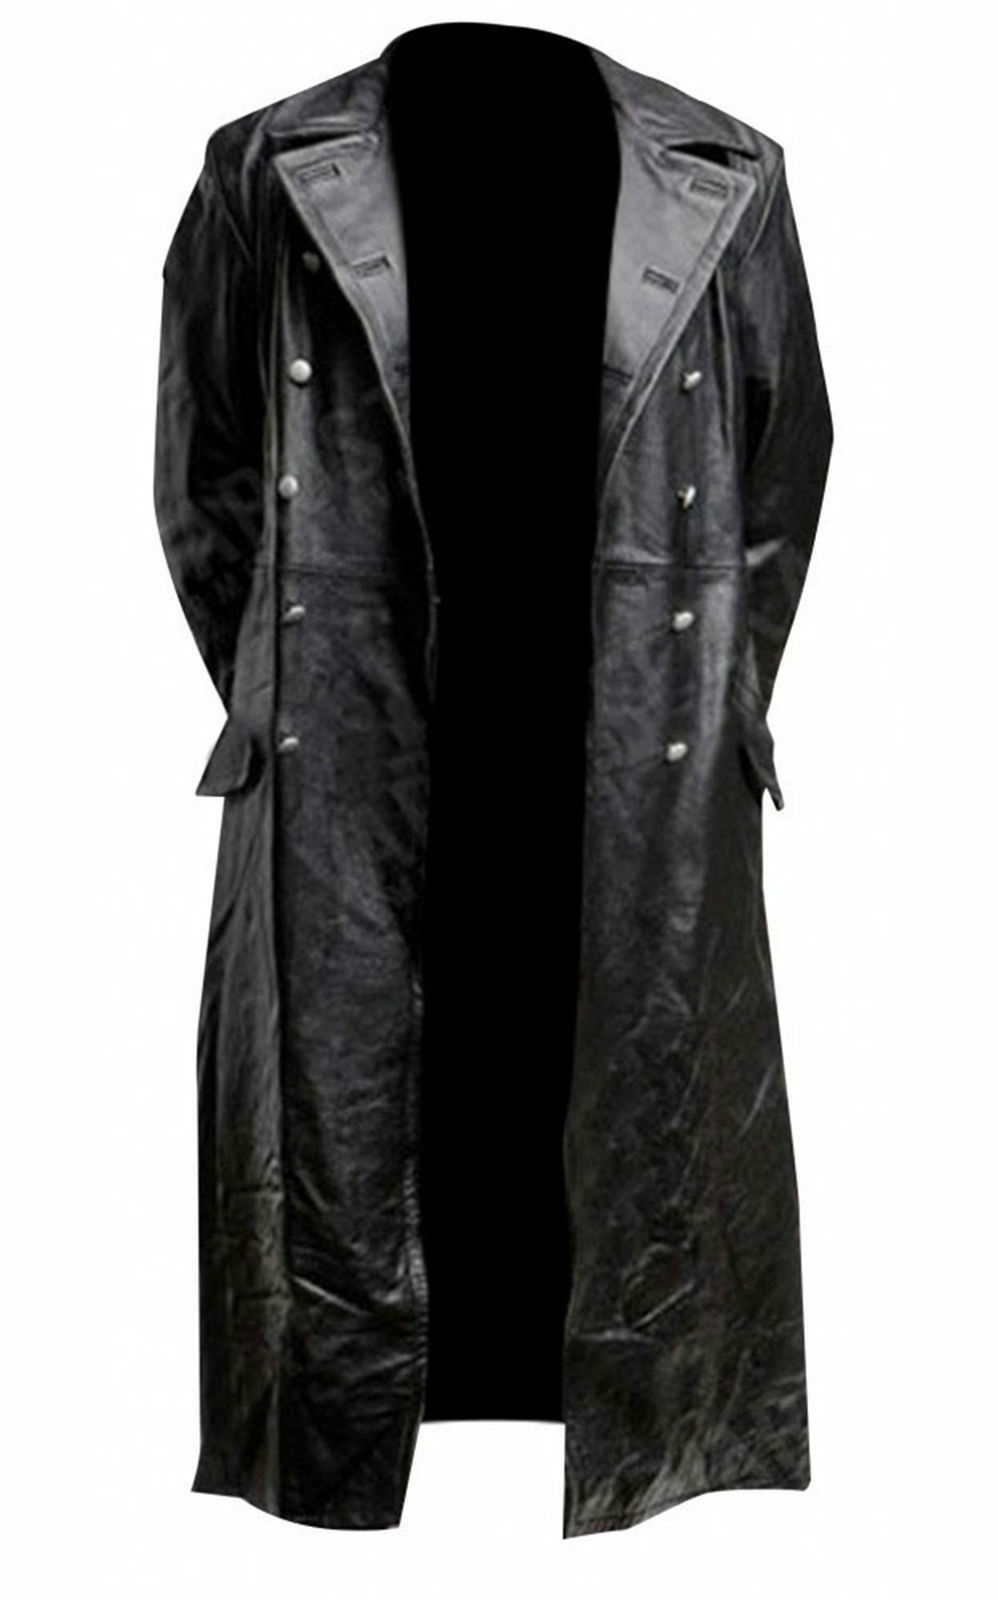 MEN'S GERMAN CLASSIC WW2 MILITARY OFFICER UNIFORM BLACK LEATHER TRENCH ...